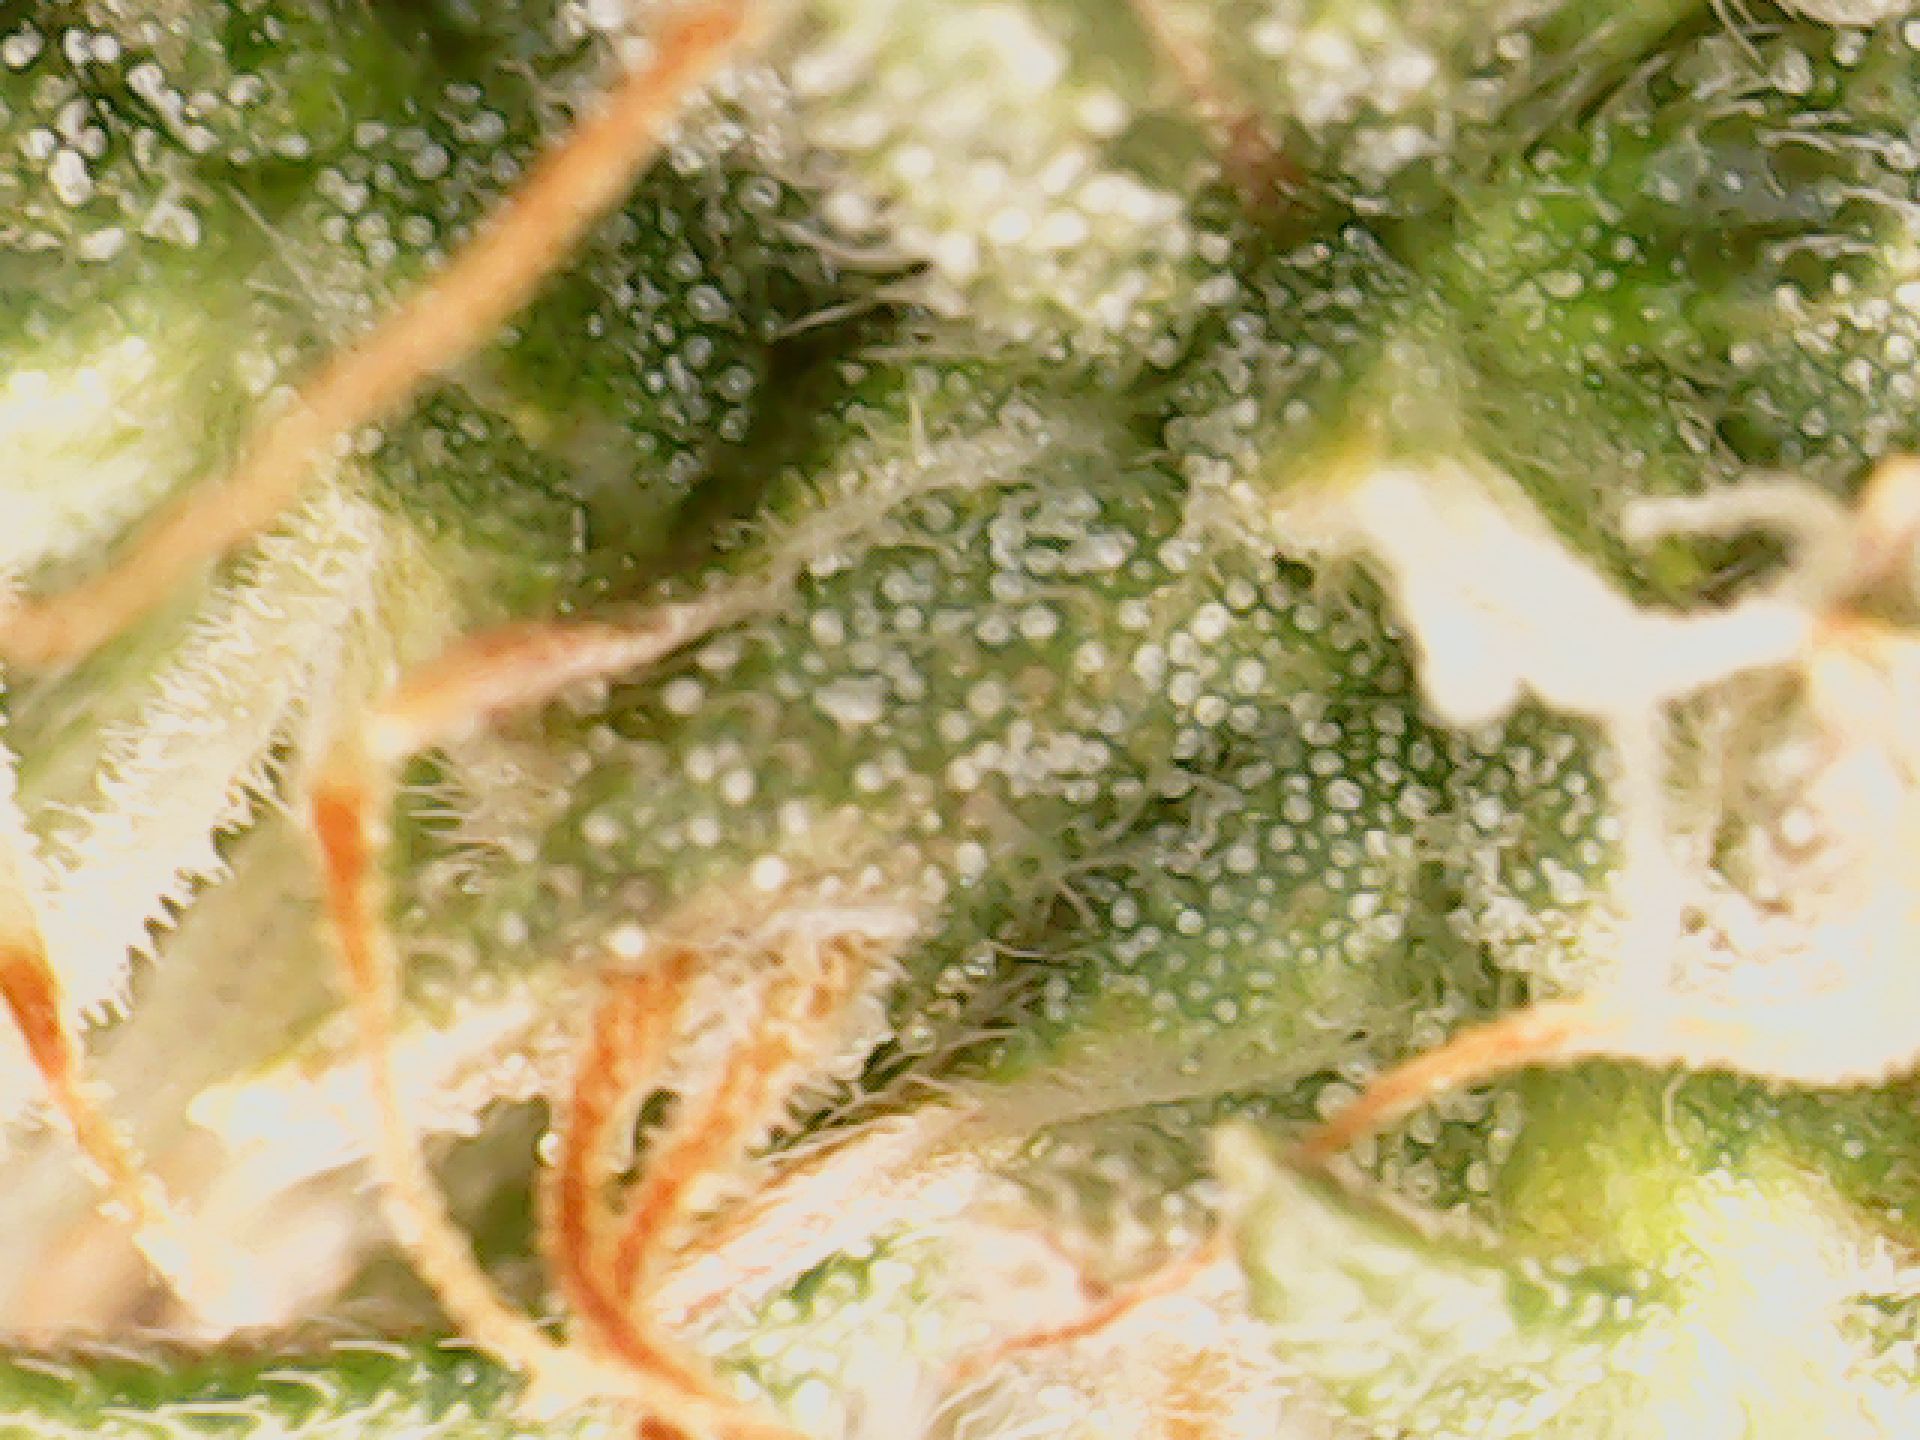 Ready for harvest trichome check